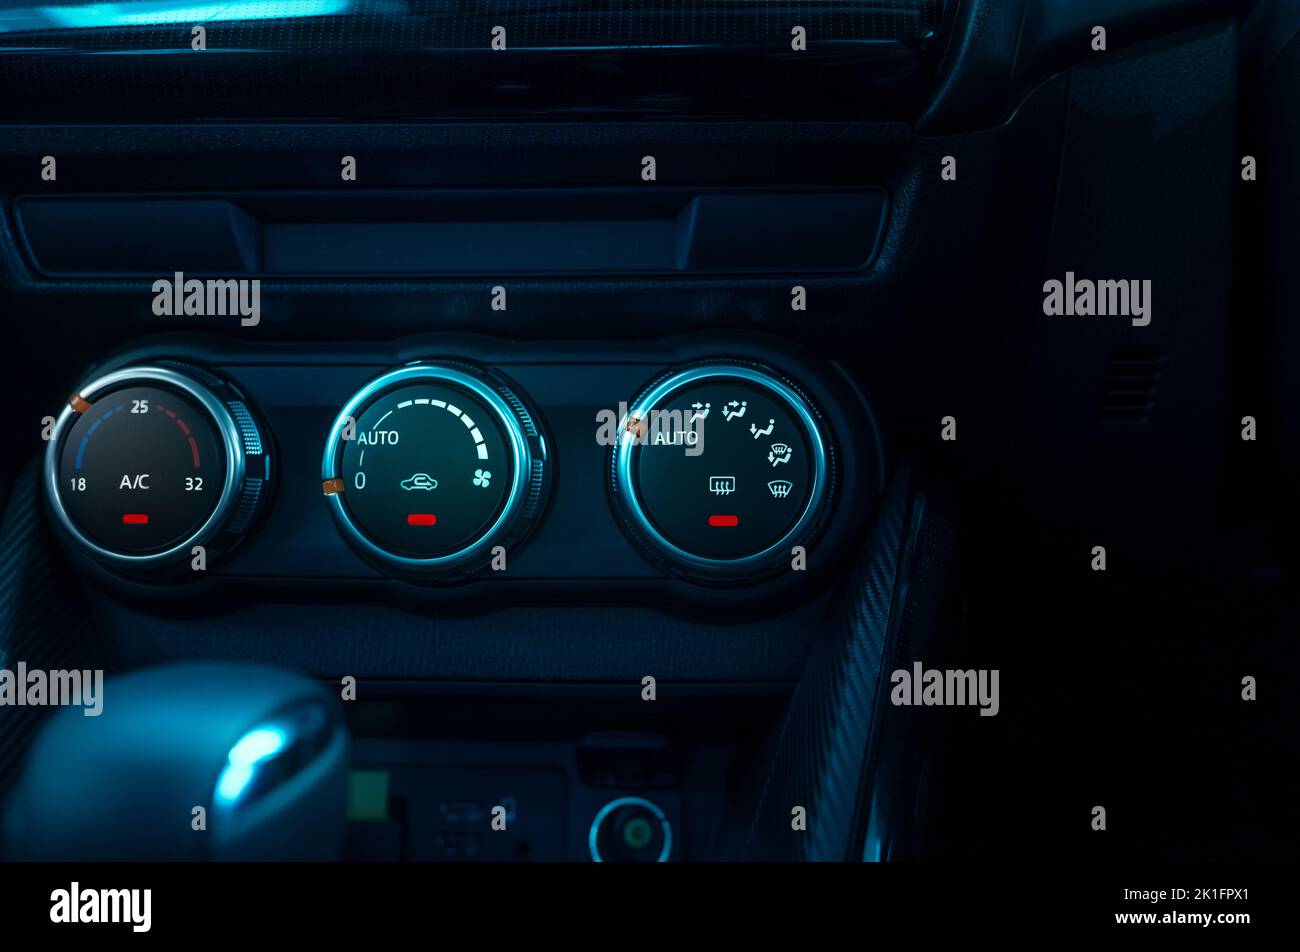 Climate control knob in modern car. Car air conditioner. Automobile air conditioning system. Car ventilation system. Ventilation system in vehicle. Stock Photo